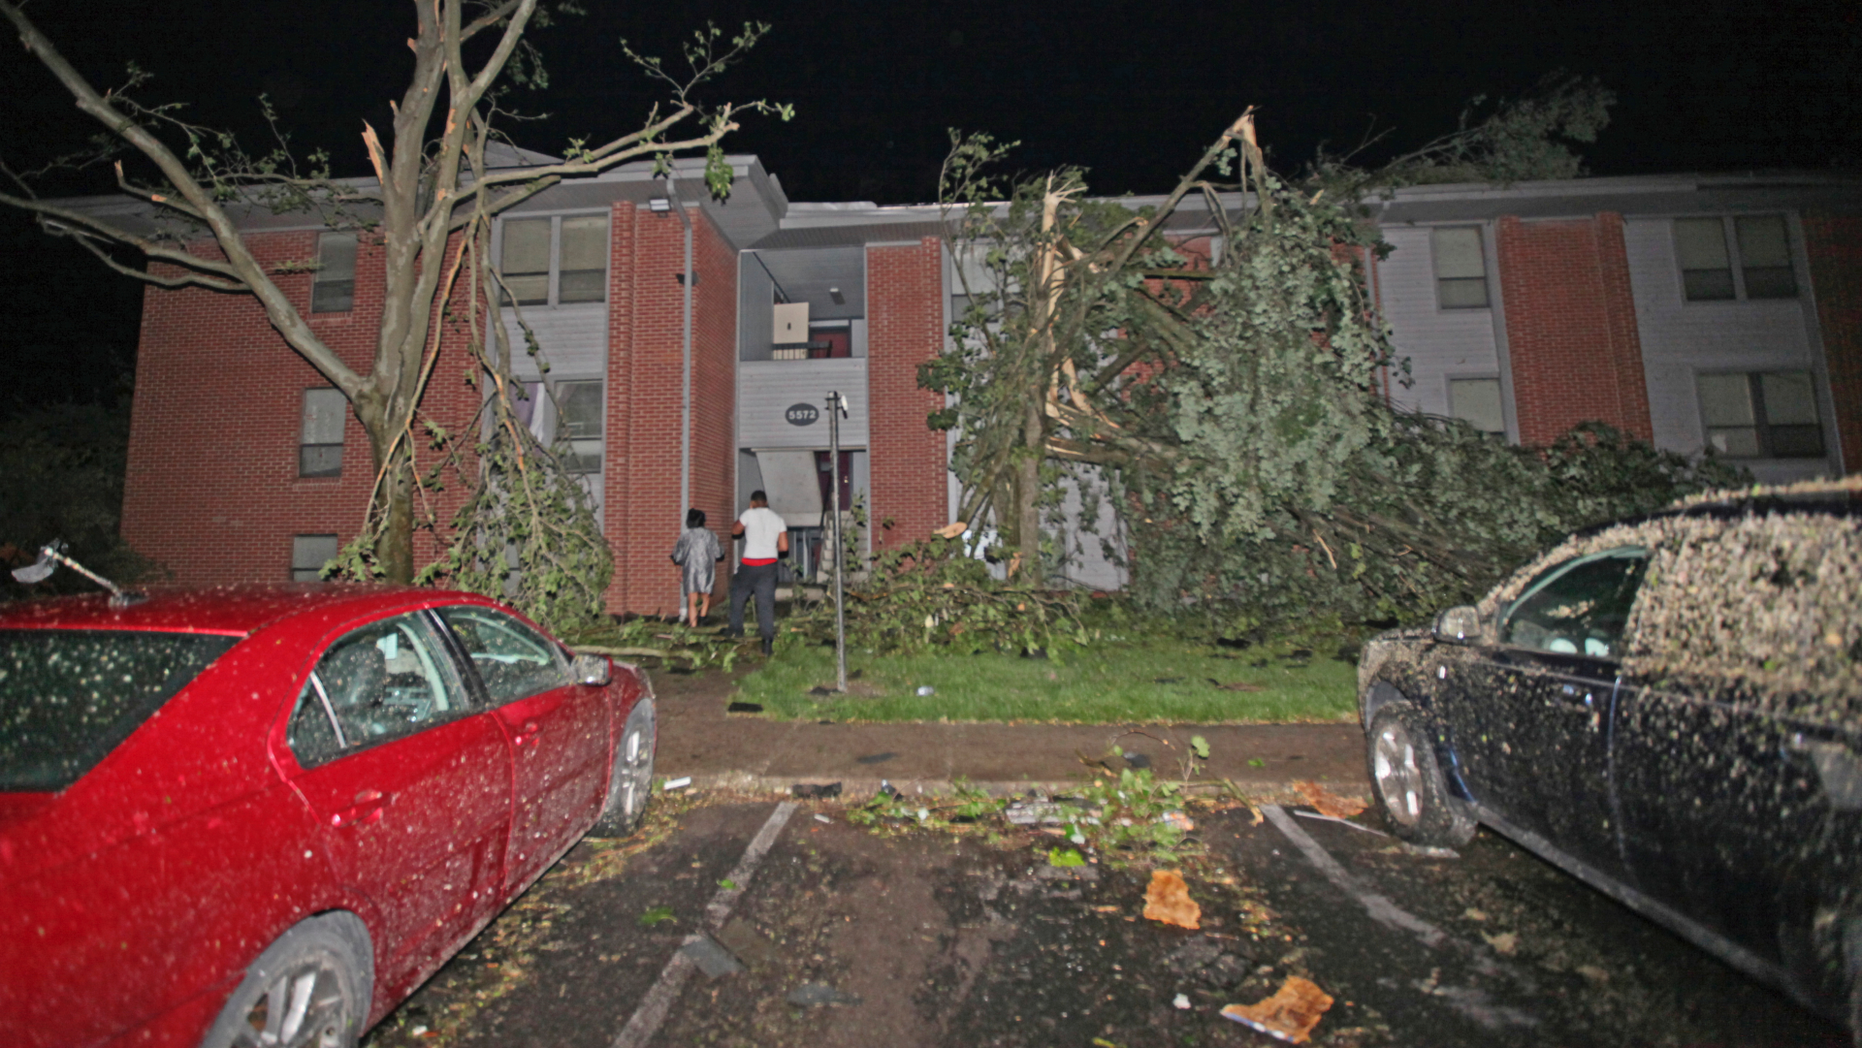 Residents walk toward their Westbrooke Village Apartment building that was heavily damaged by a tornado Tuesday morning, May 28, 2019, in Dayton, Ohio. The Ohio Department of Transportation is using snow plows to remove debris off an Ohio highway after a "large and dangerous" tornado hit the area late Monday. (Doral Chenoweth III/Columbus Dispatch via AP)